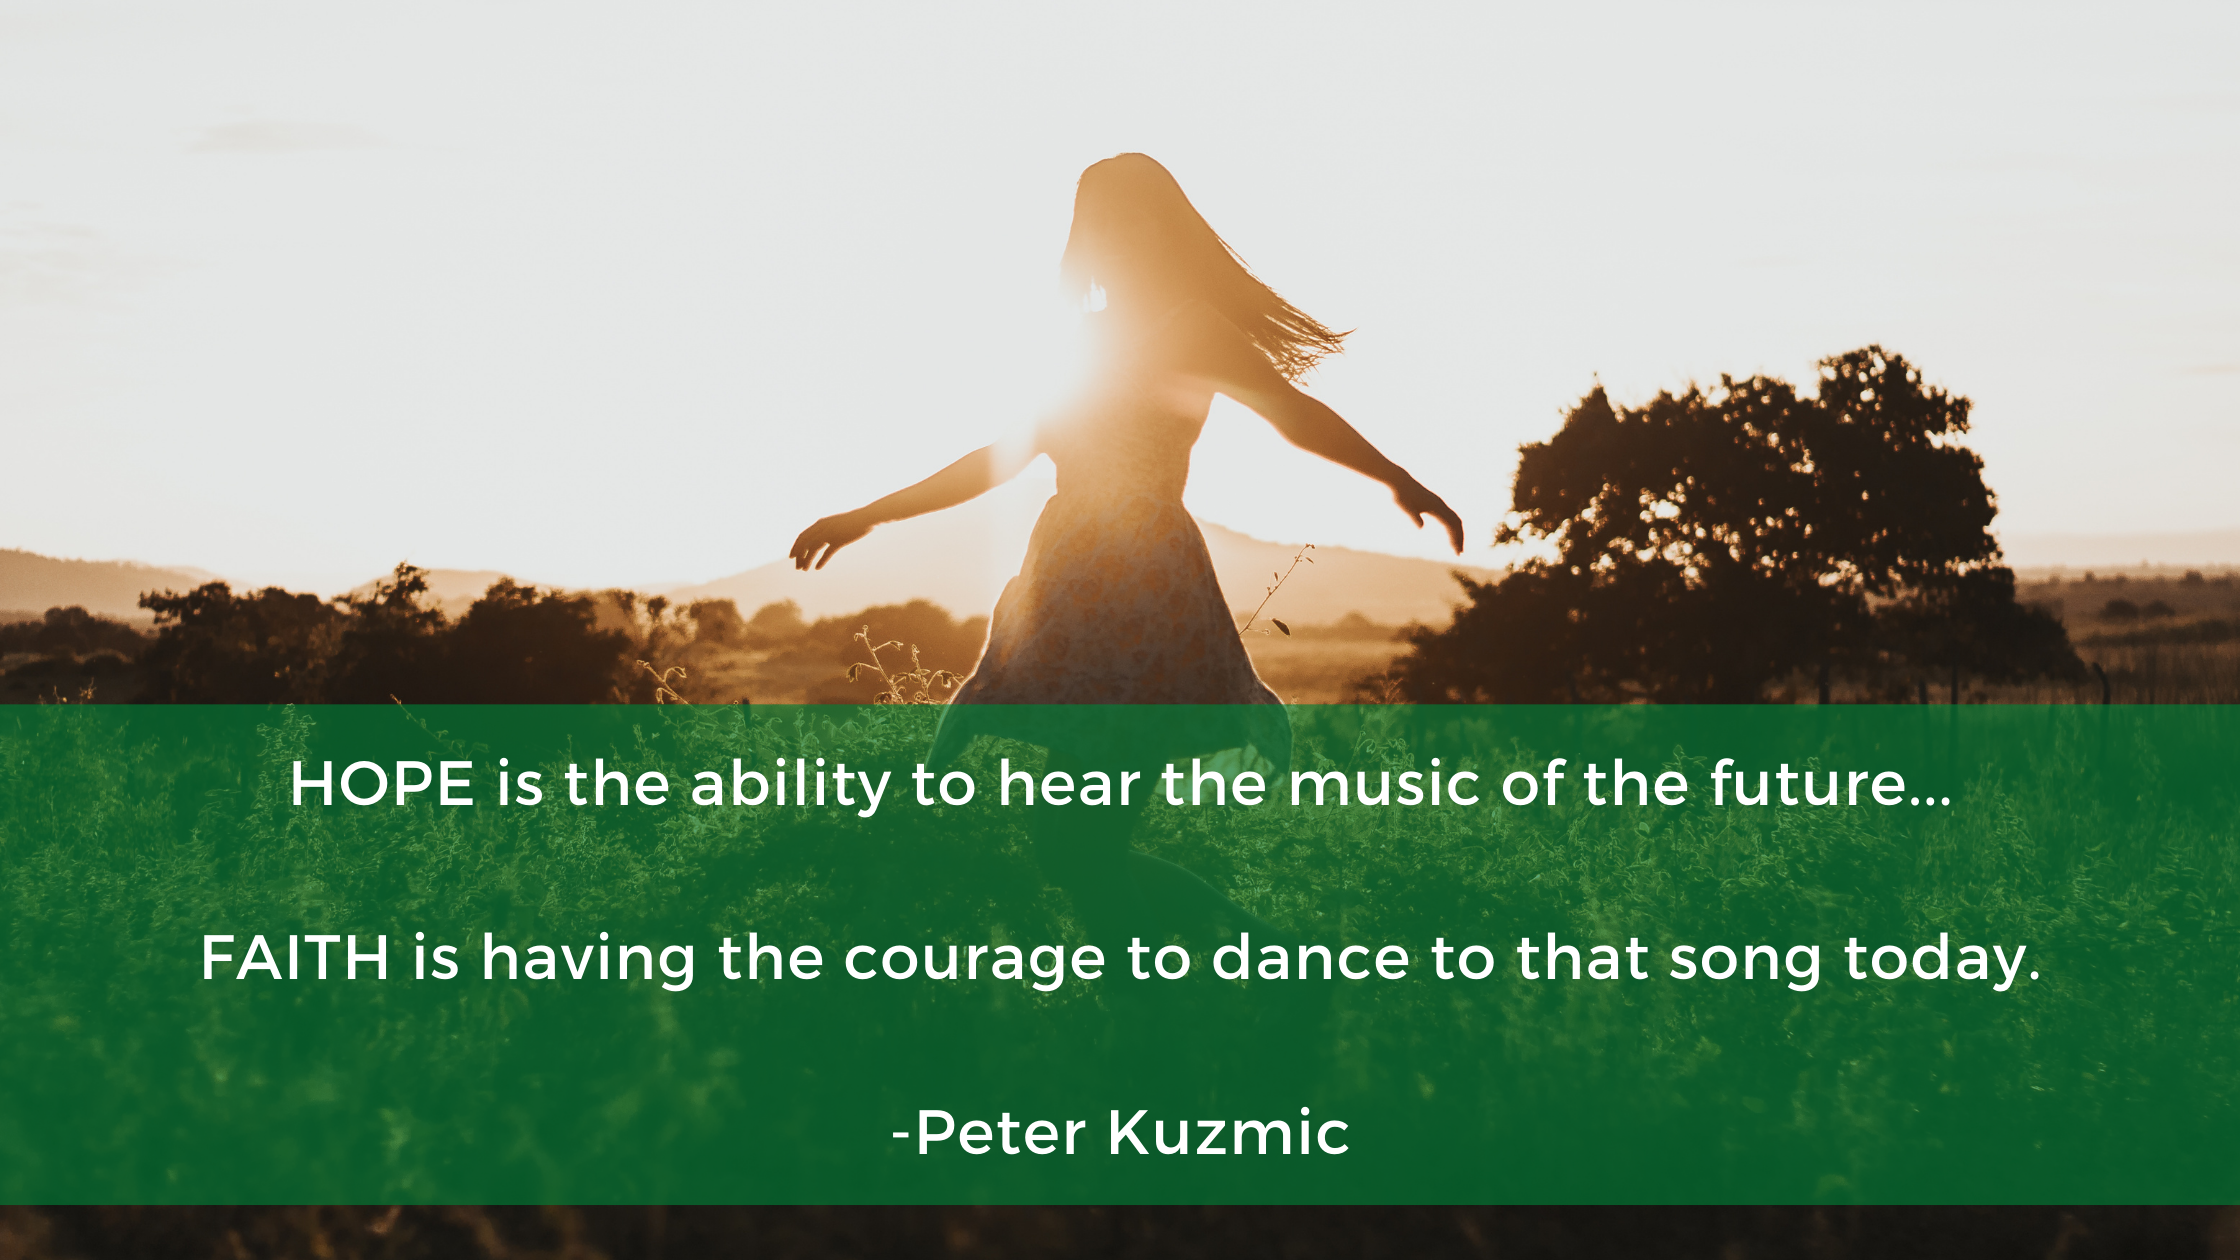 HOPE is the ability to hear the music of the future... FAITH is having the courage to dance to that song today. -Peter Kuzmic